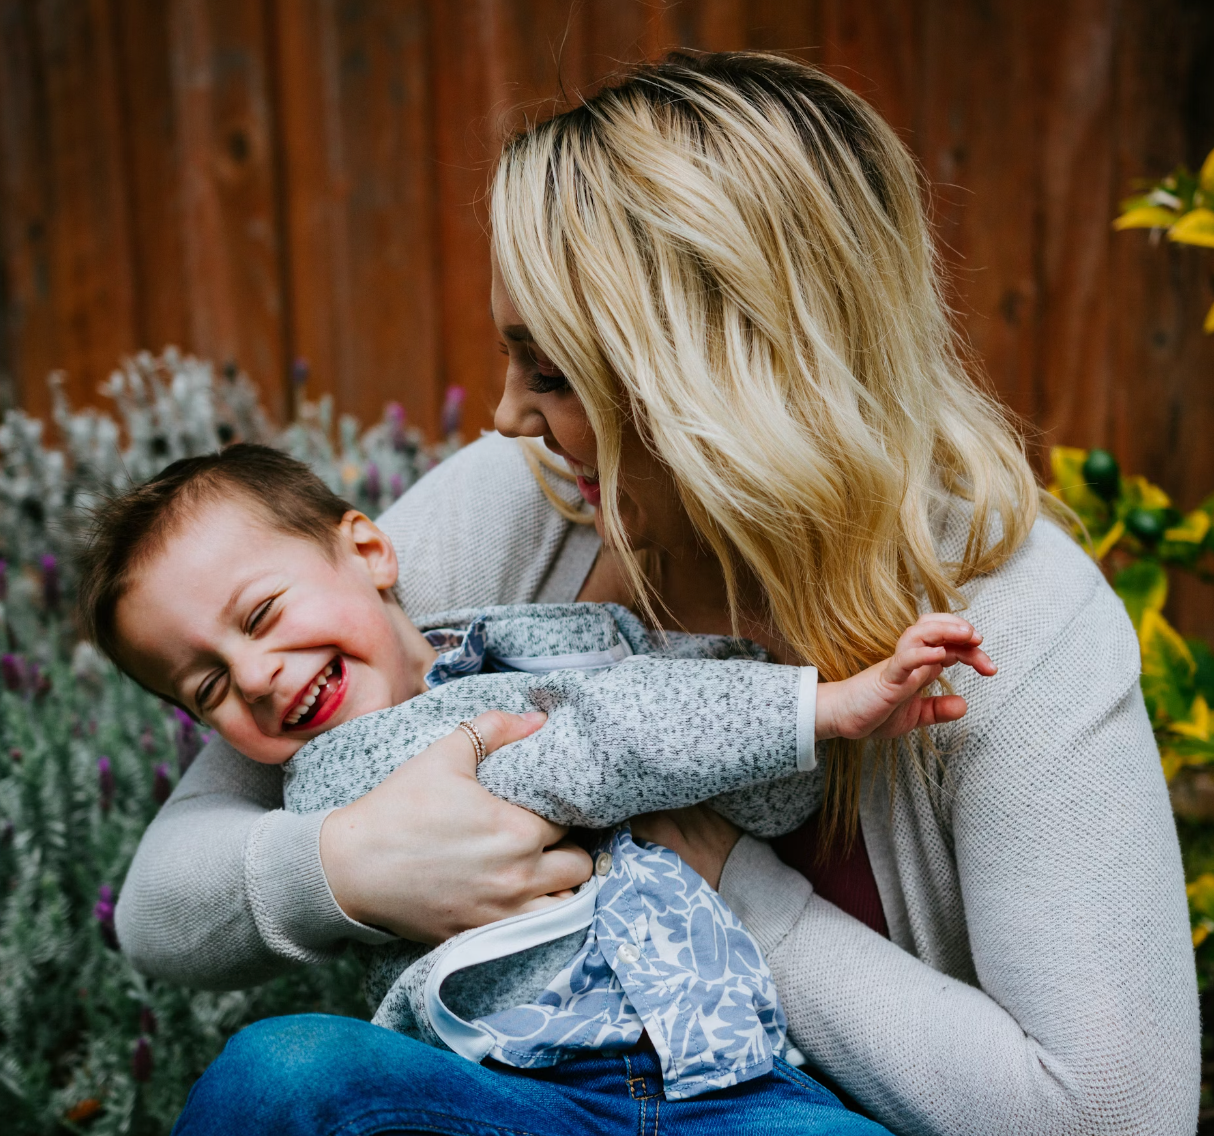 7 Signs of Secure Attachment in Toddlers